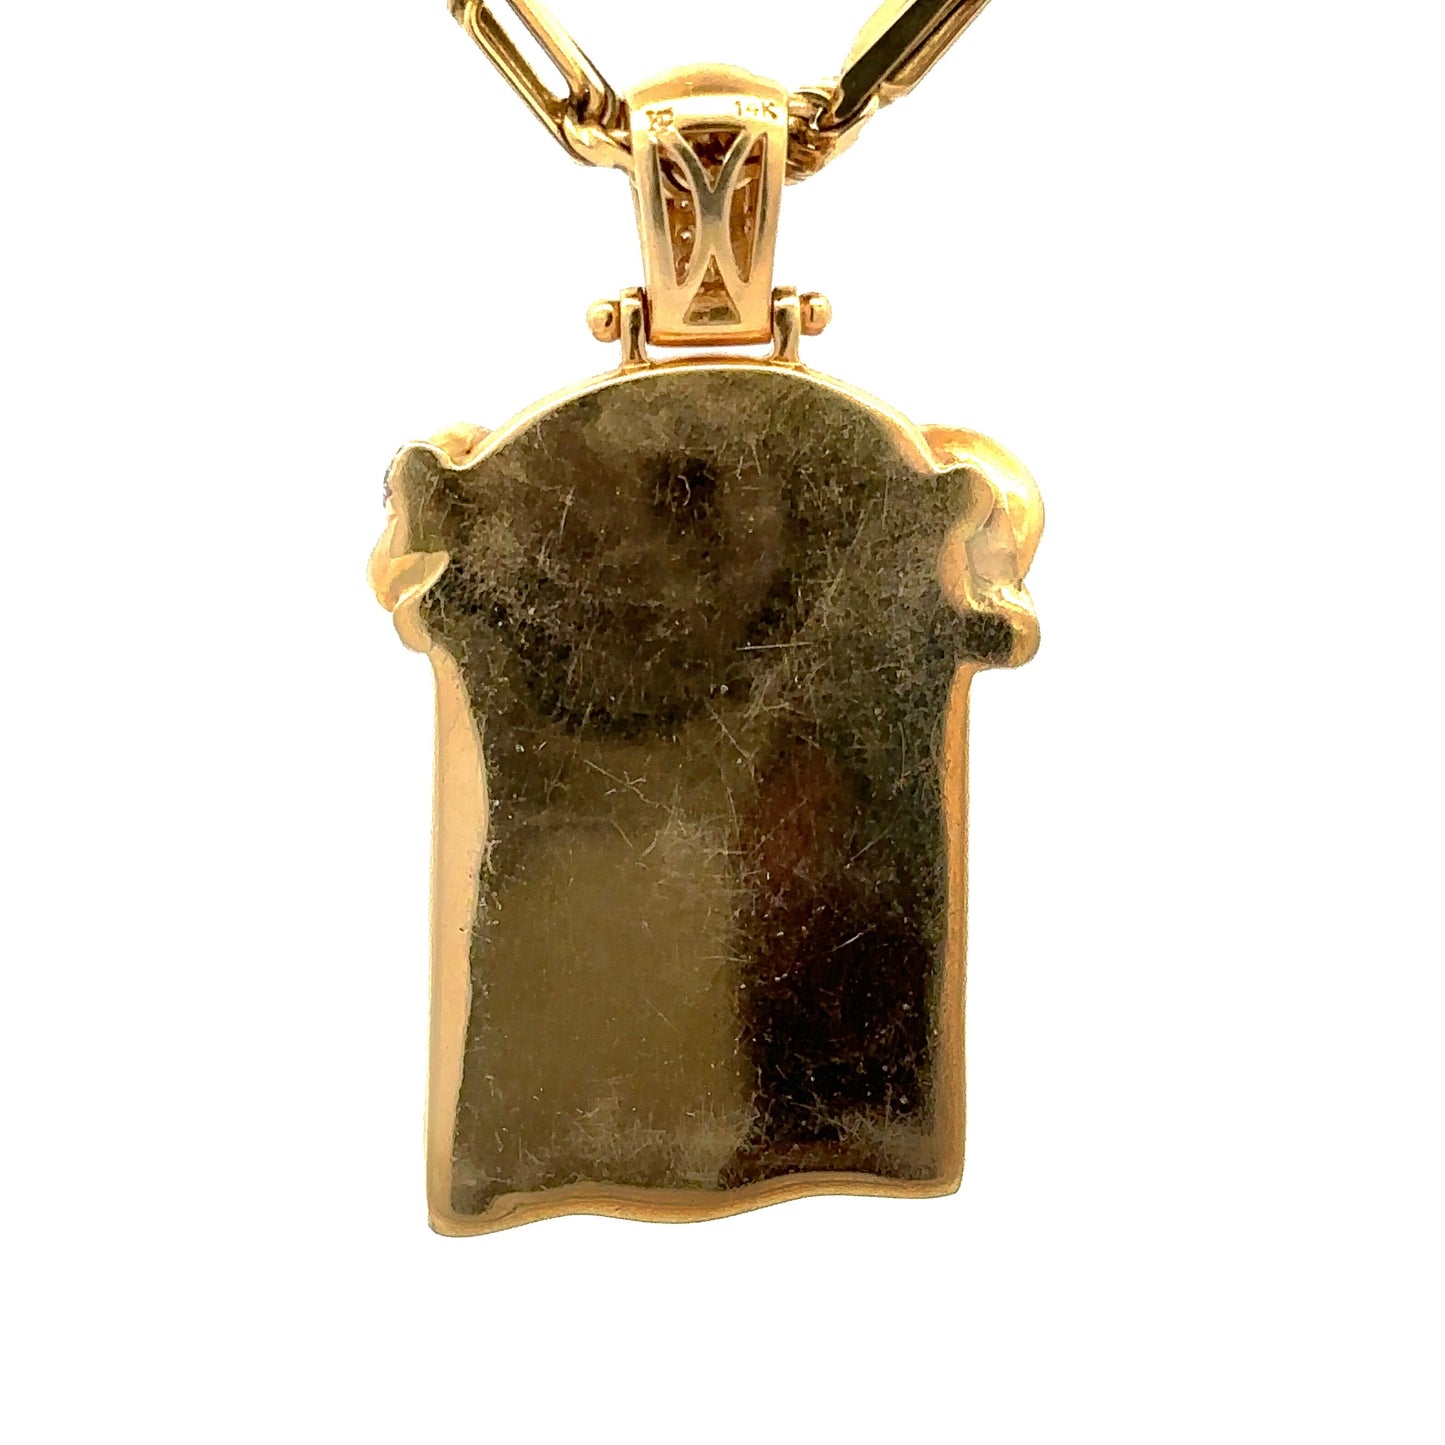 back of yellow gold pendant with scratches on gold. 14K stamp on bail